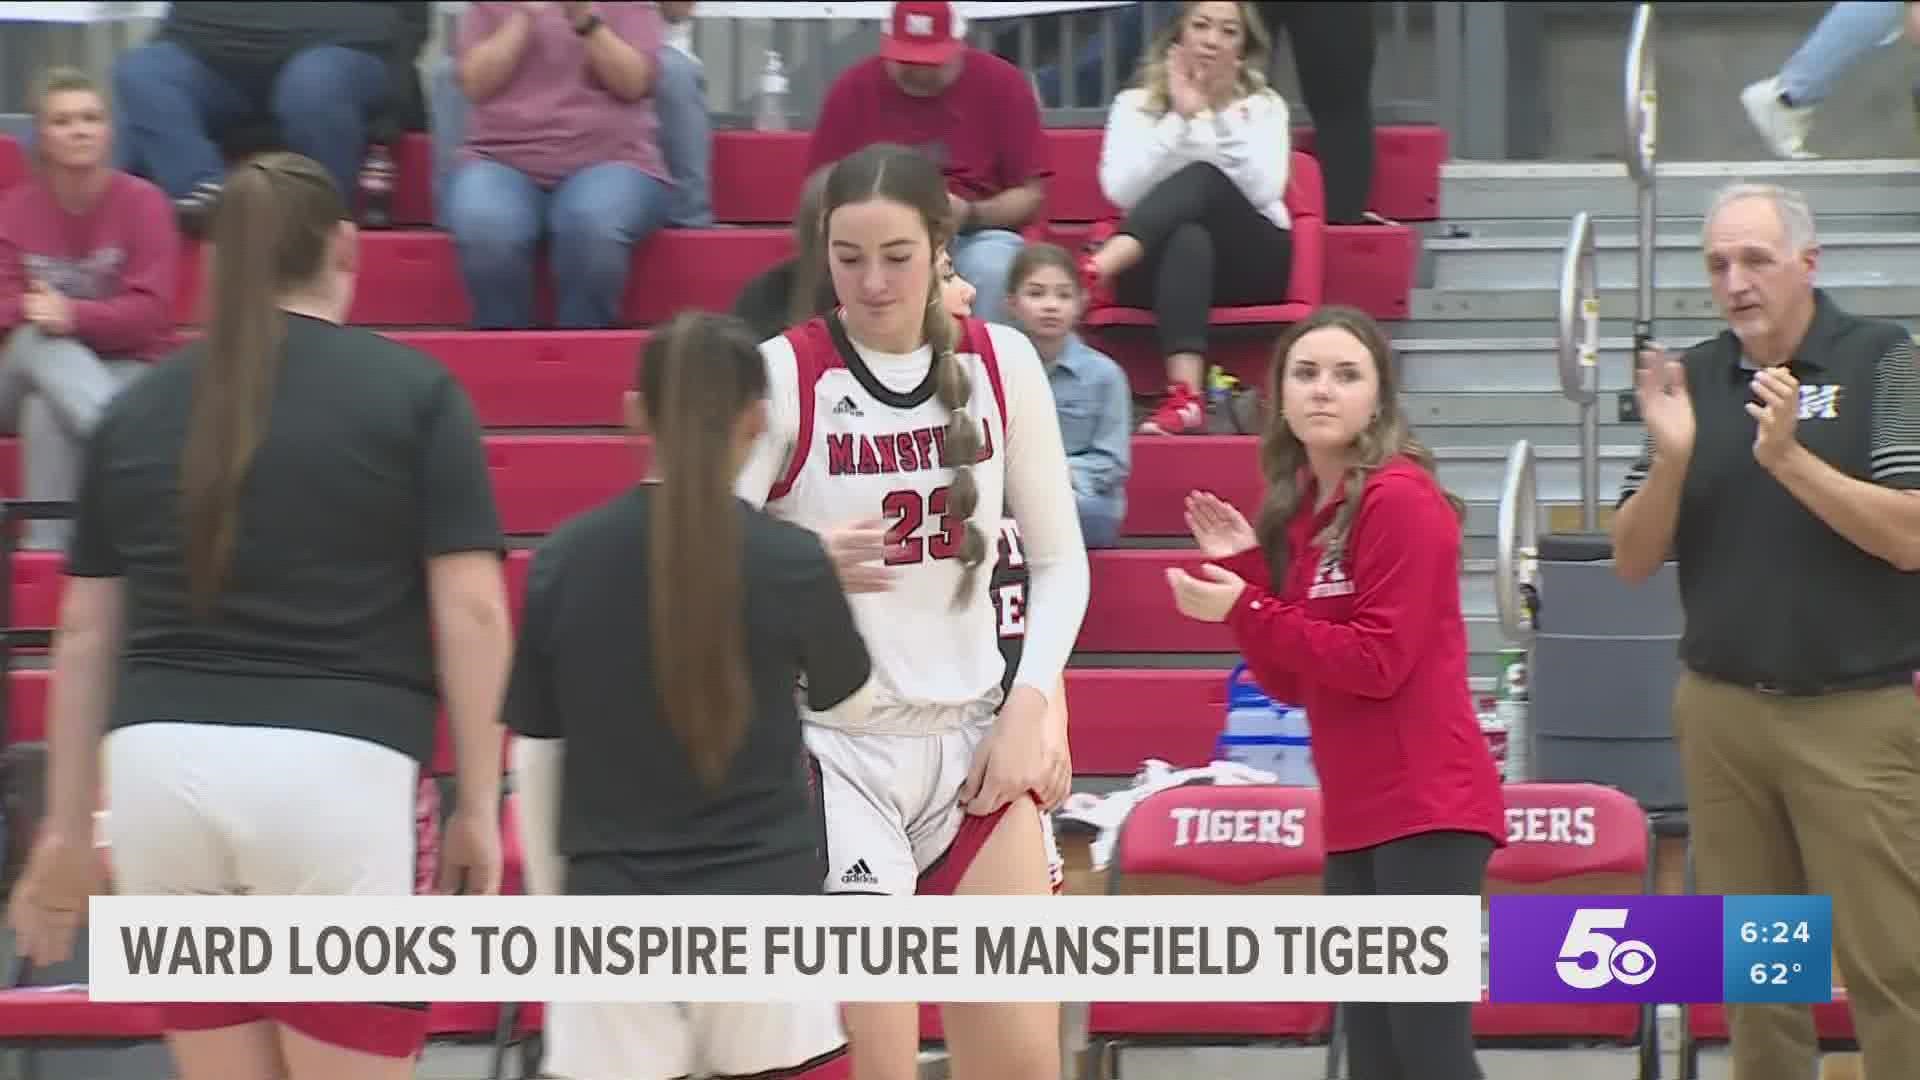 The 15-year-old is only in her first year of high school basketball but already has offers from five Division I schools, including Arkansas.